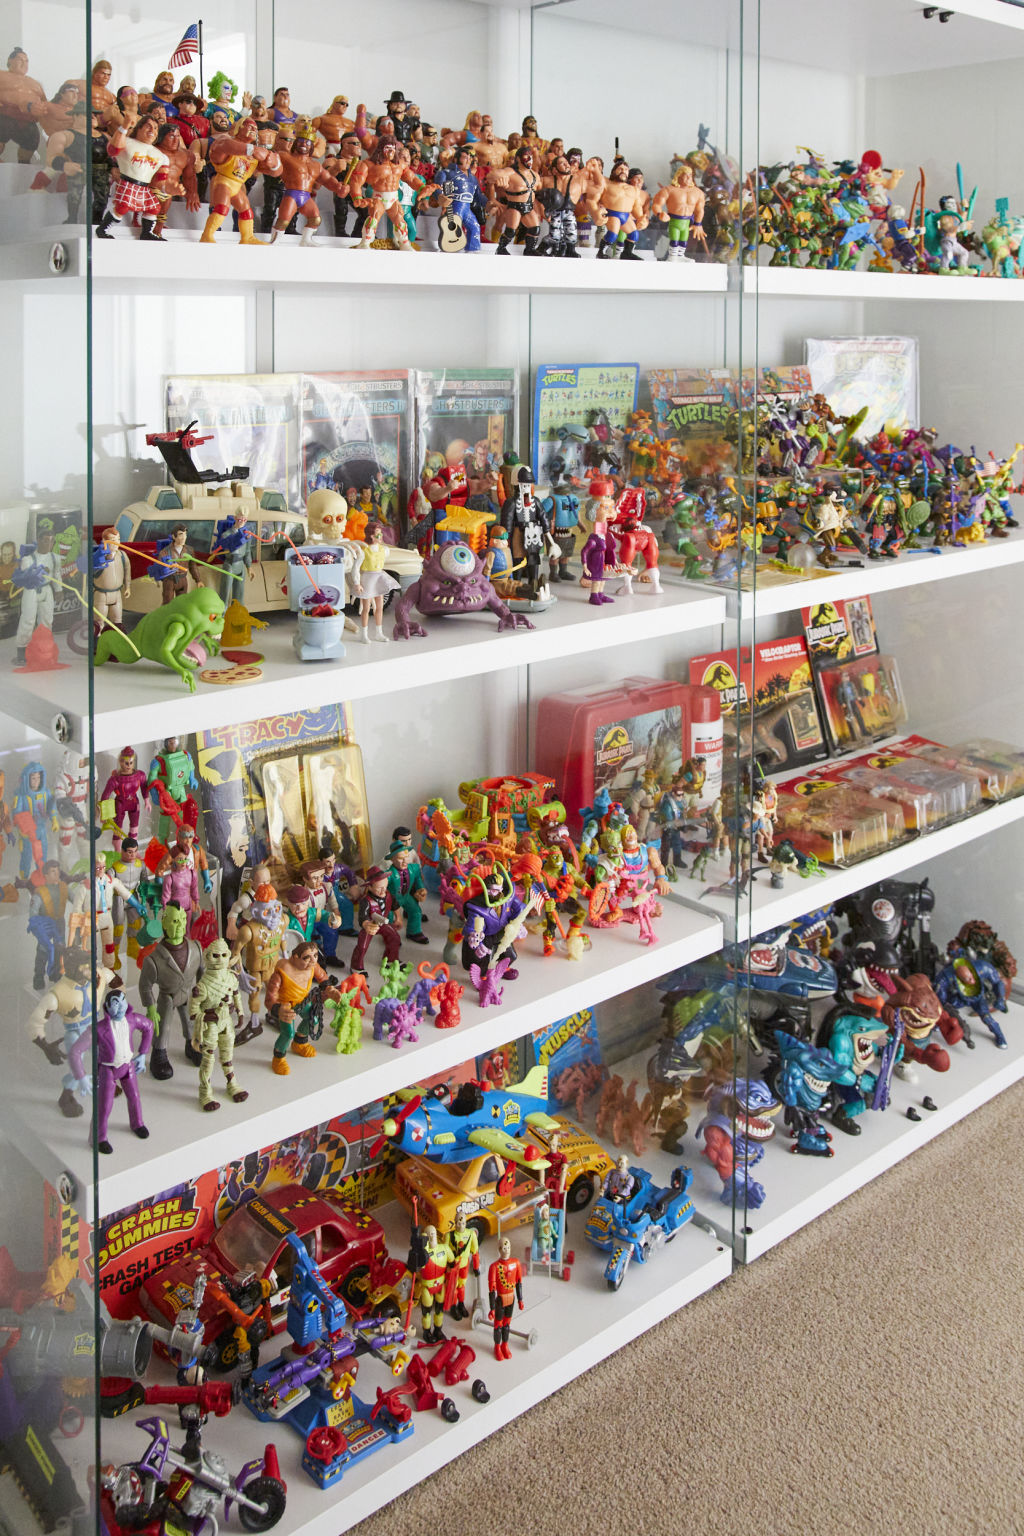 The collector's passion for pop culture artefacts dates back to his childhood. Photo: Nicky Ryan